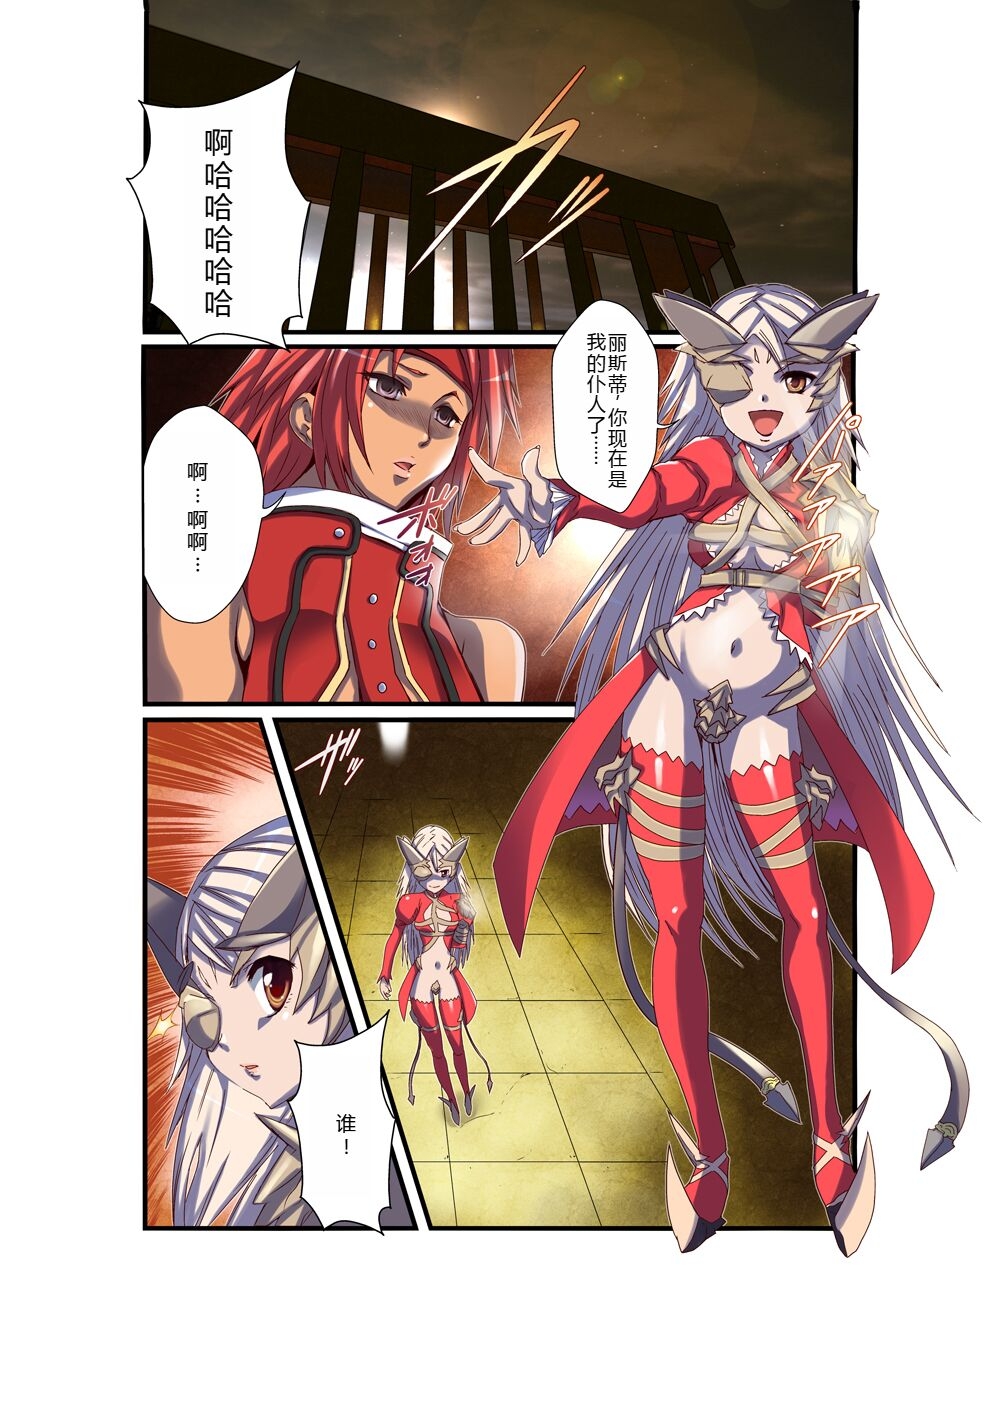 [Utsuro na Hitomi] Queen's *lade Mind-control Manga (Queen's Blade) [chinese] [lalala1234个人机翻汉化] 0